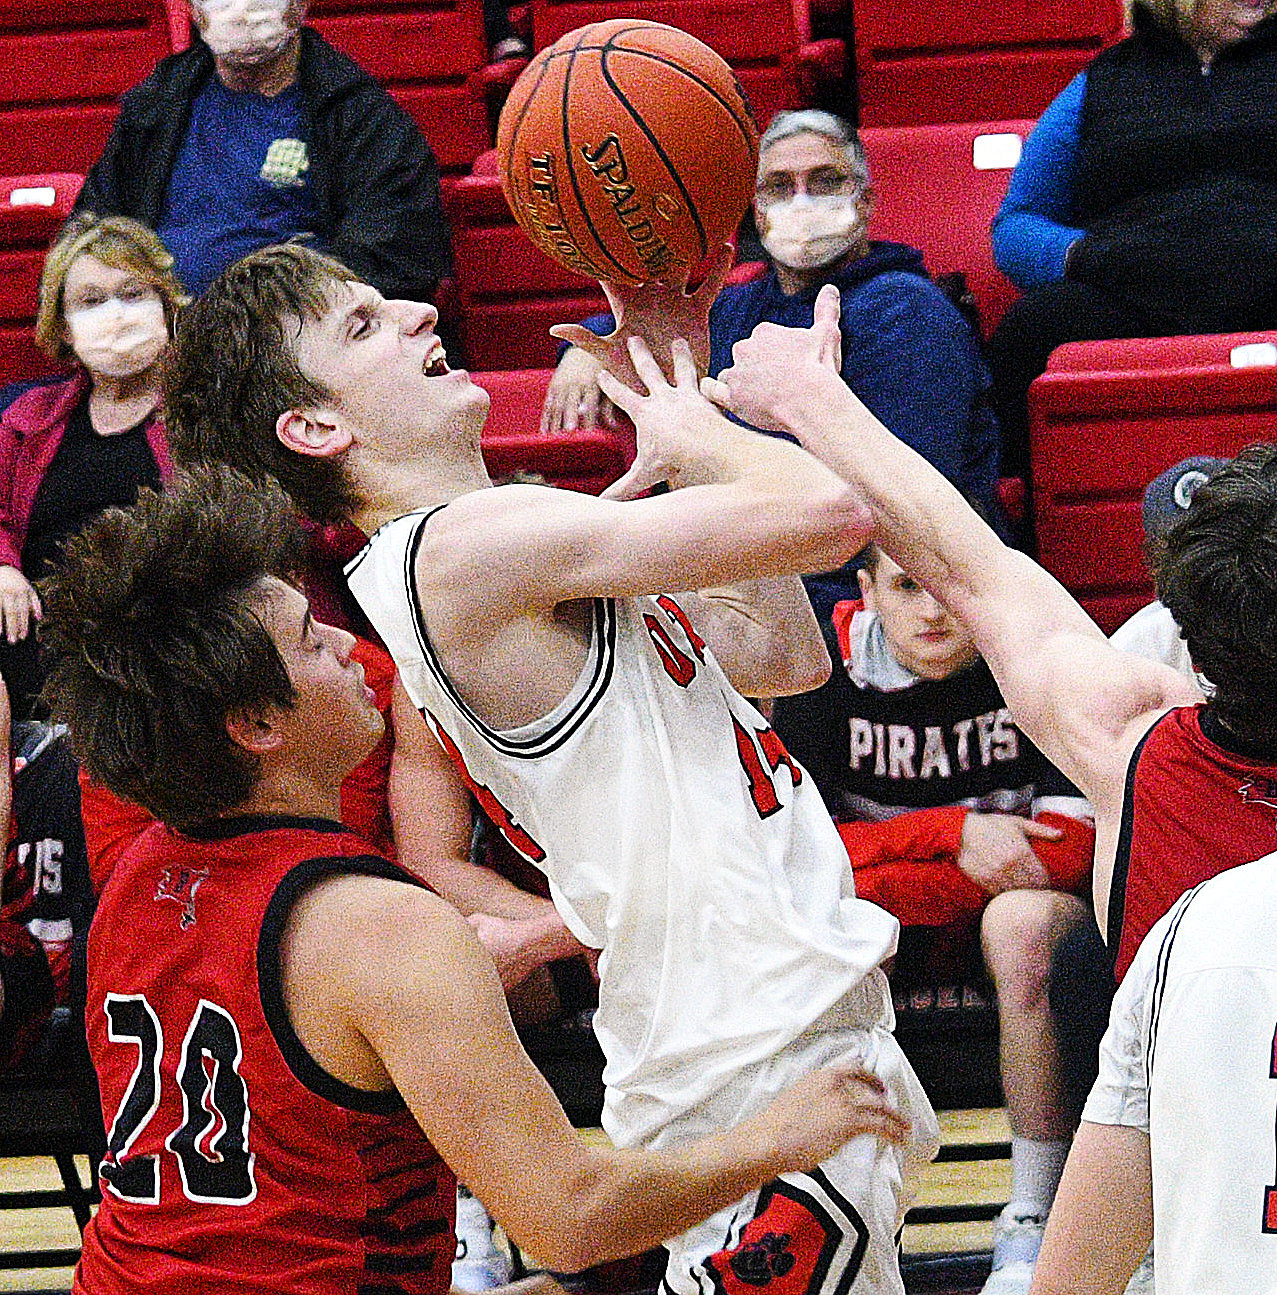 ETHAN WHATLEY is fouled during a shot attempt.